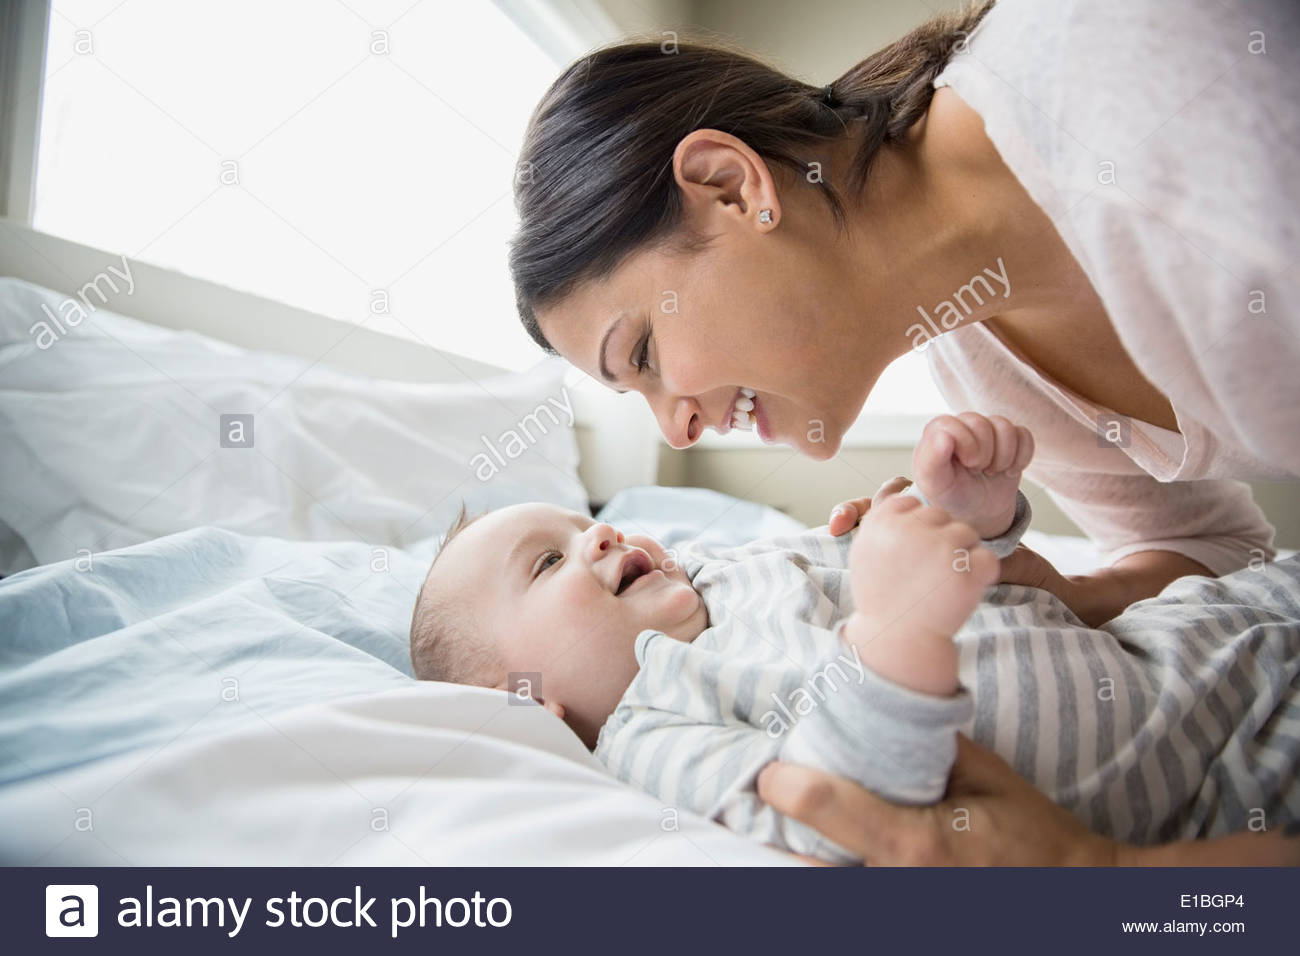 Mother and baby on bed Stock Photo